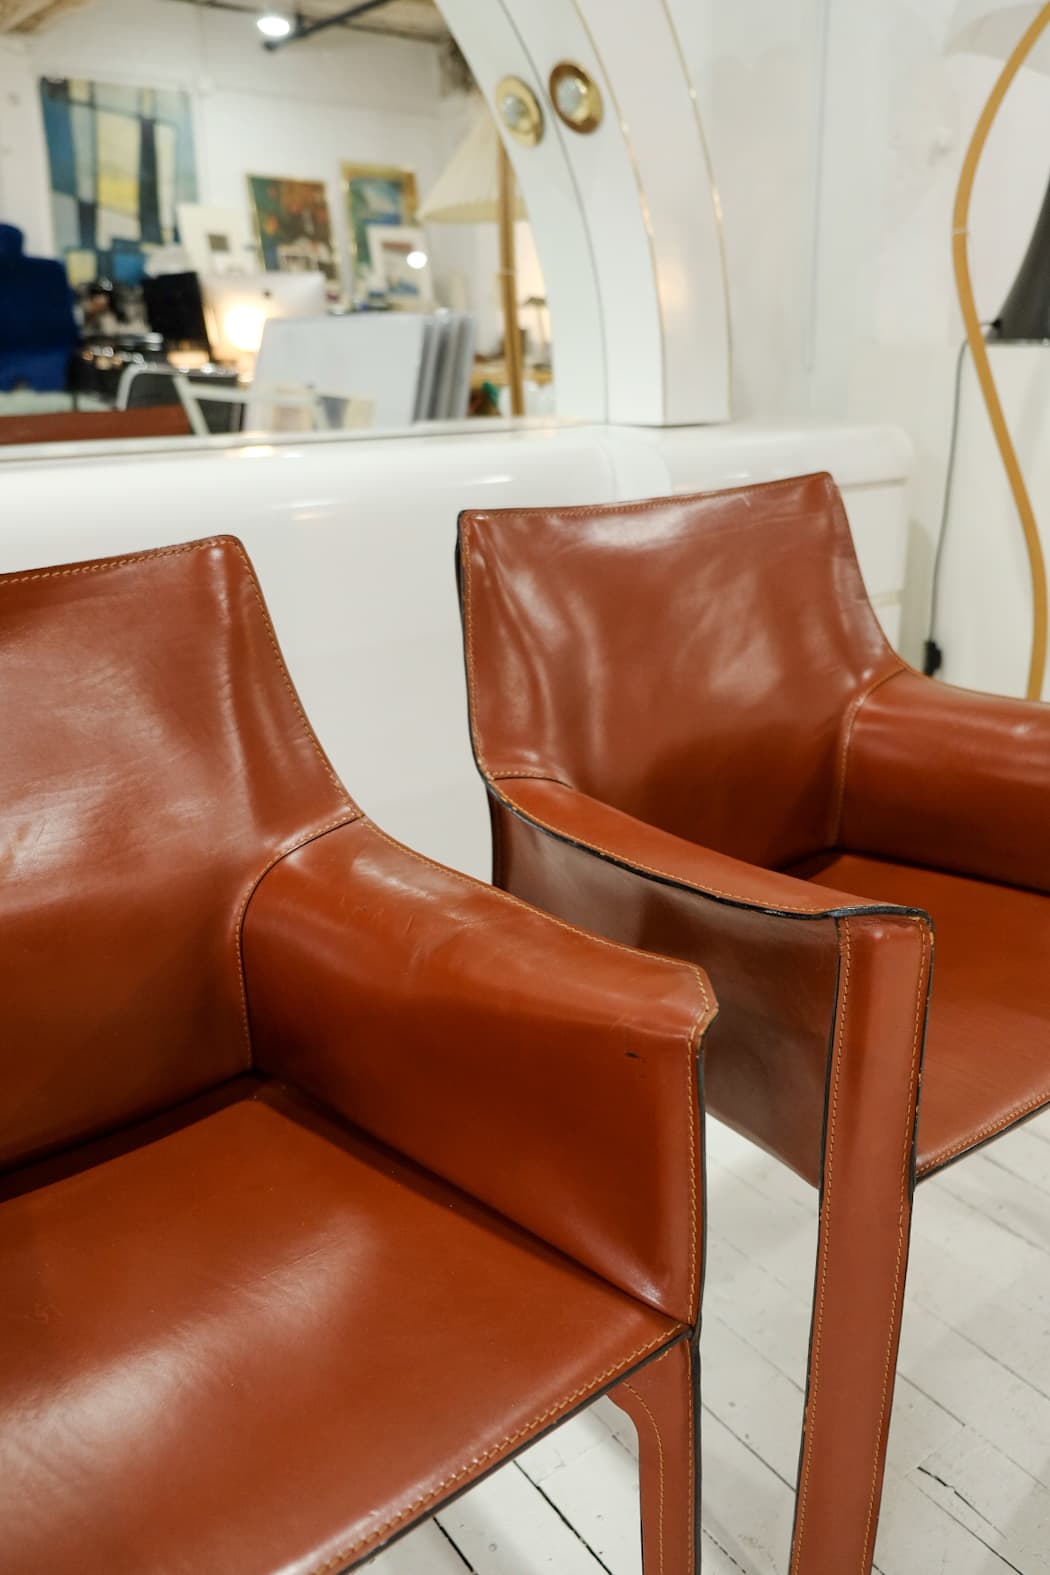 Cassina Cab 413 Leather Armchair by Mario Bellini